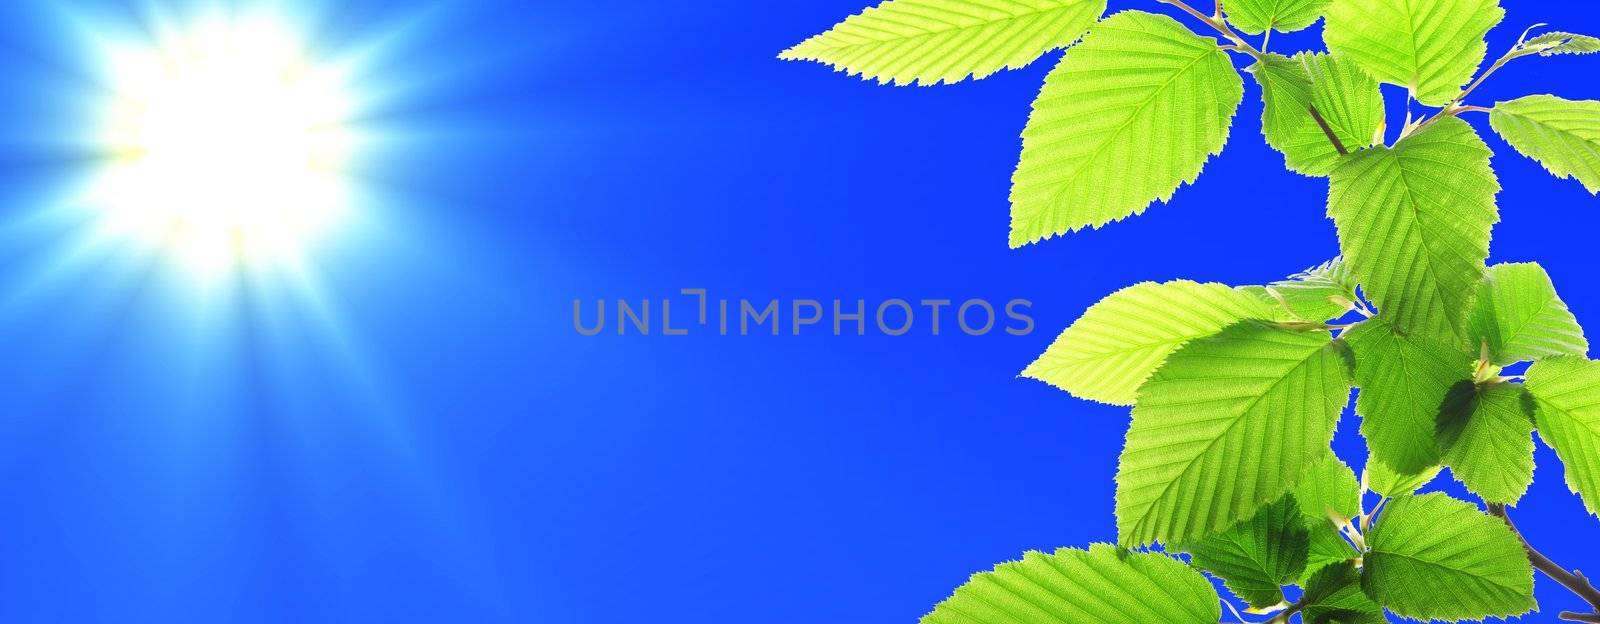 green leaves and blue sky with sun and copyspace